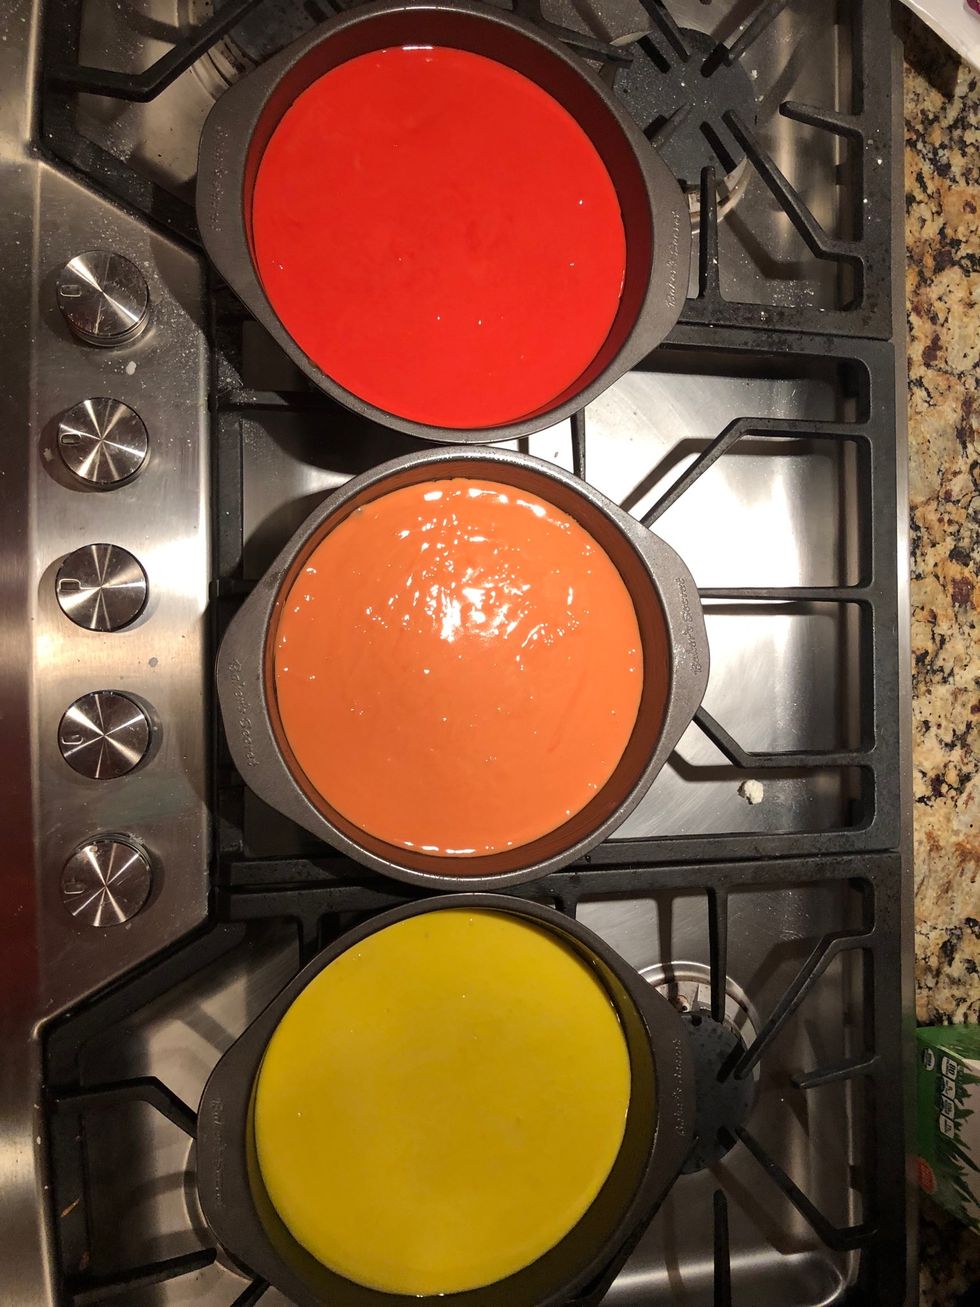 Wash cake pans and put the remaining 3 colors into the pans. Bake for 18-20 minutes and then cool for 10 minutes.